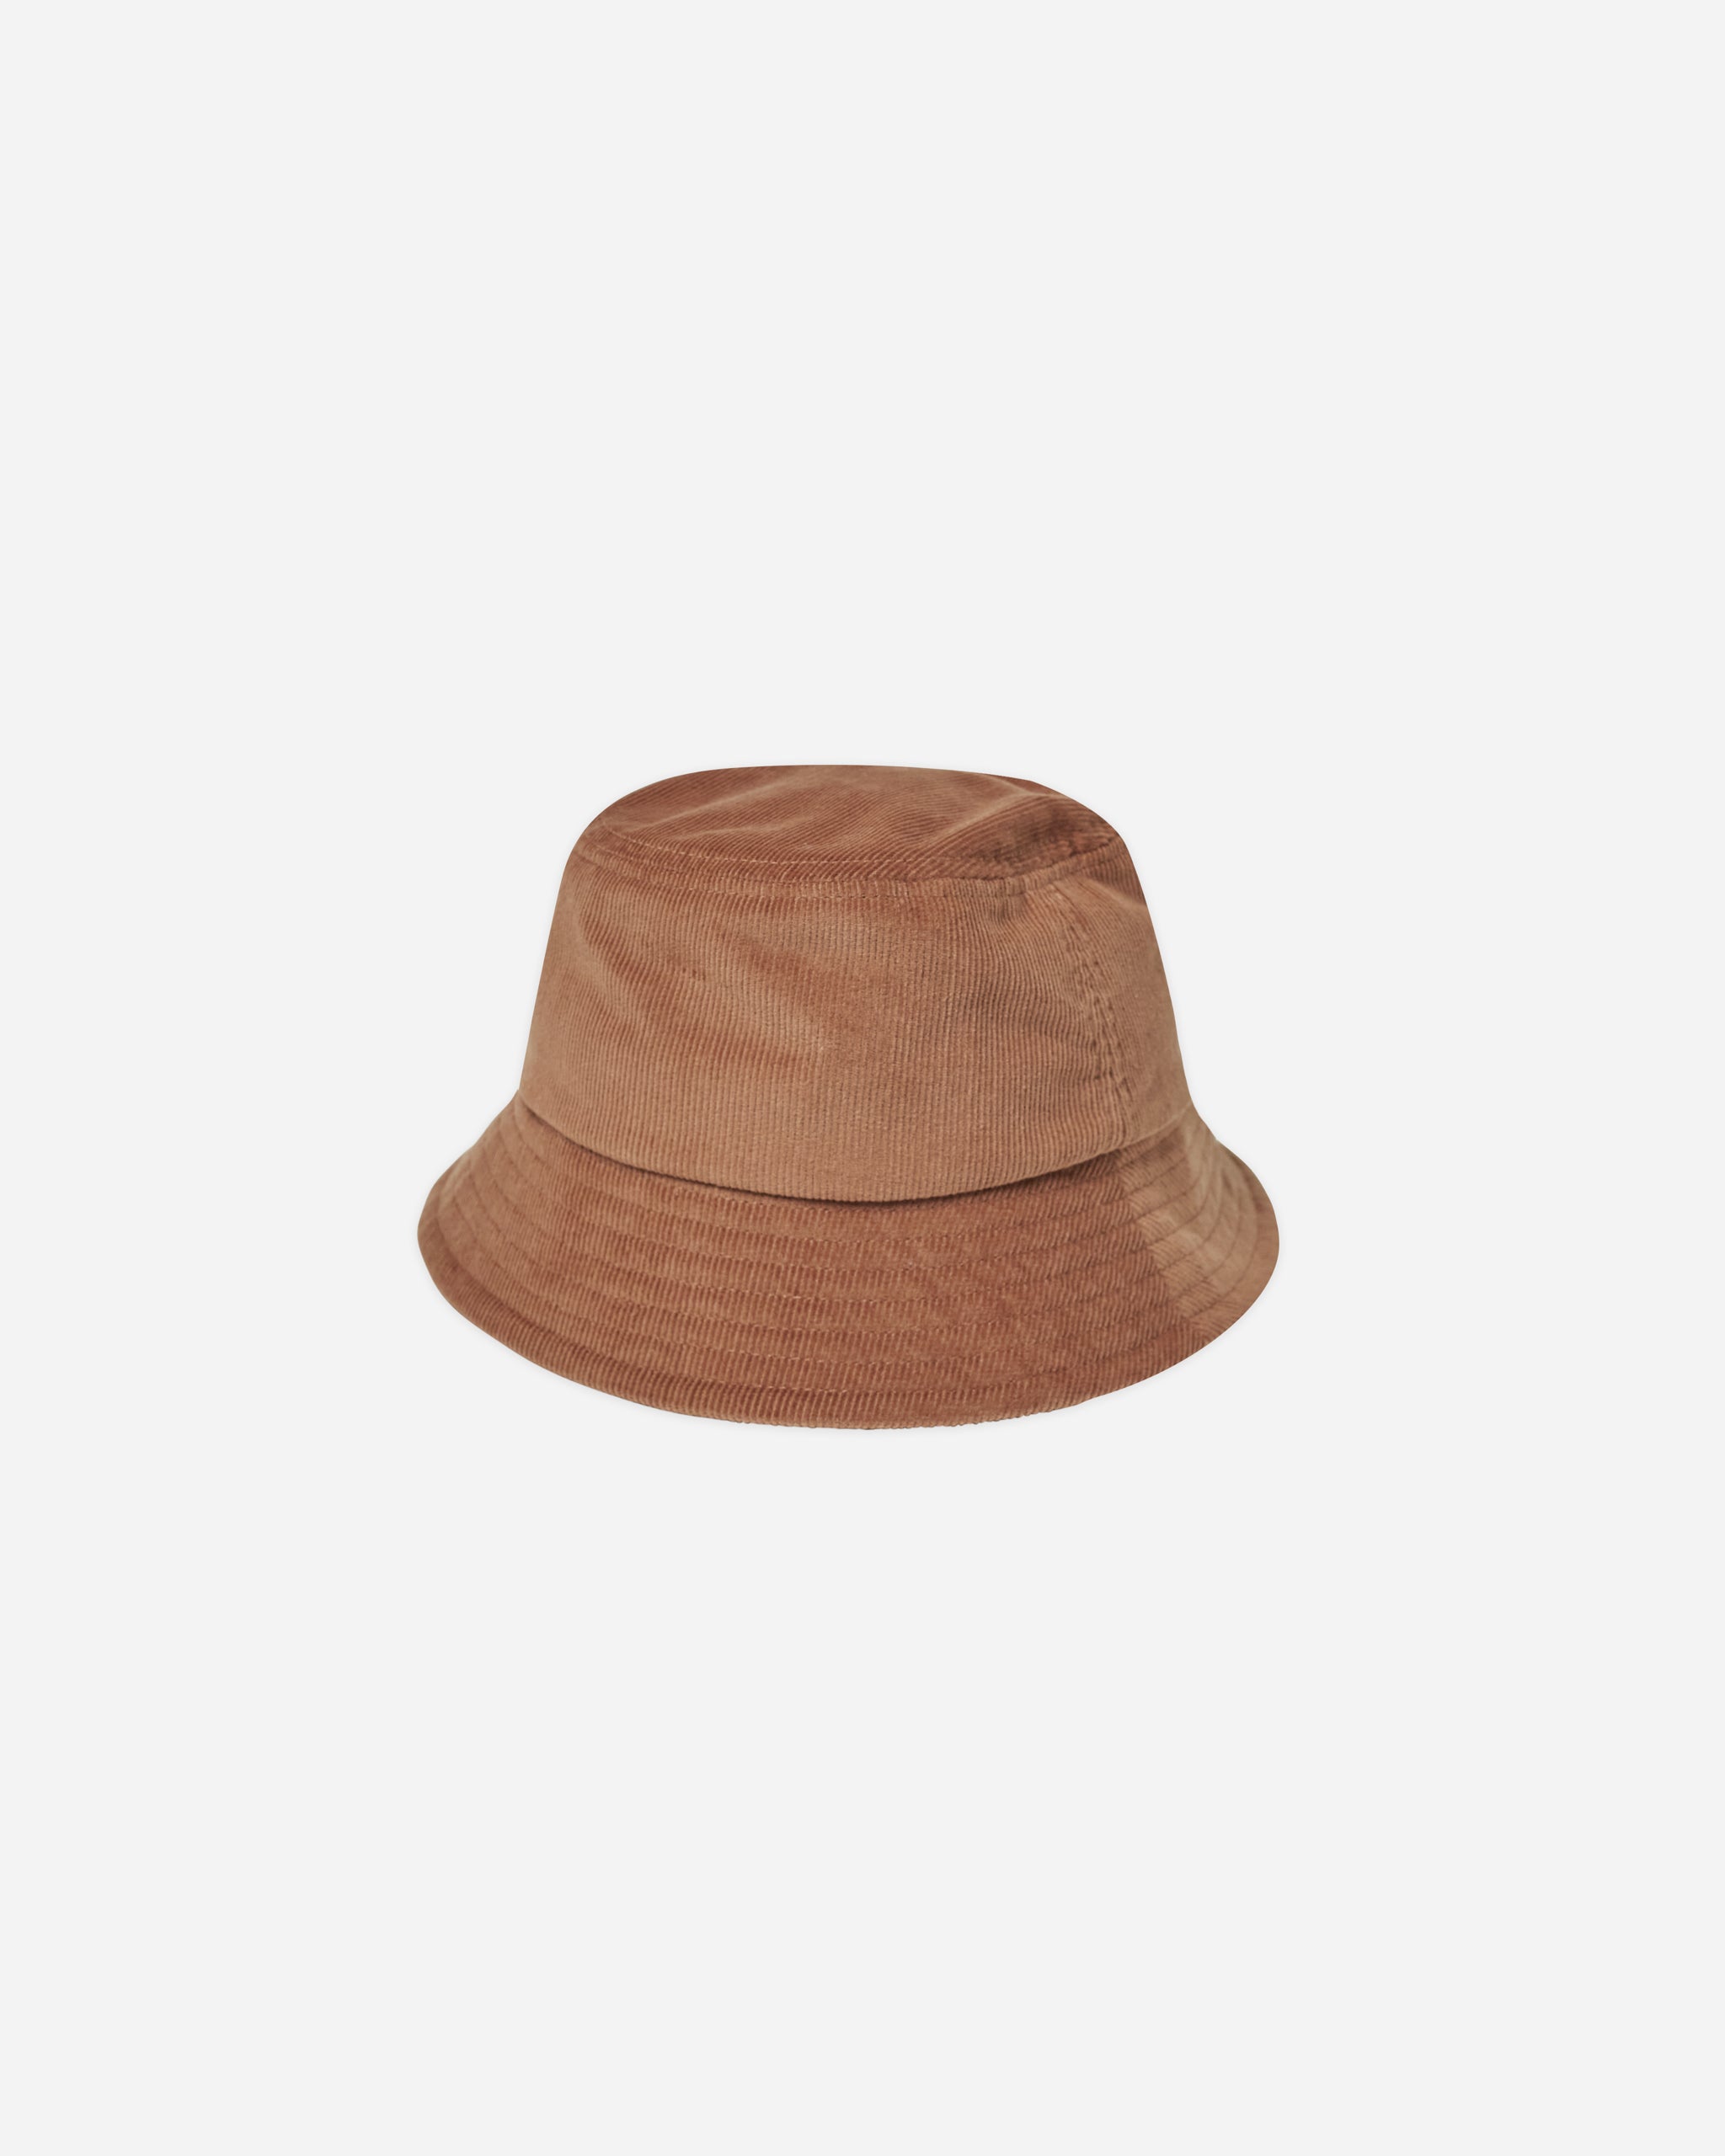 Bucket Hat || Spice - Rylee + Cru | Kids Clothes | Trendy Baby Clothes | Modern Infant Outfits |